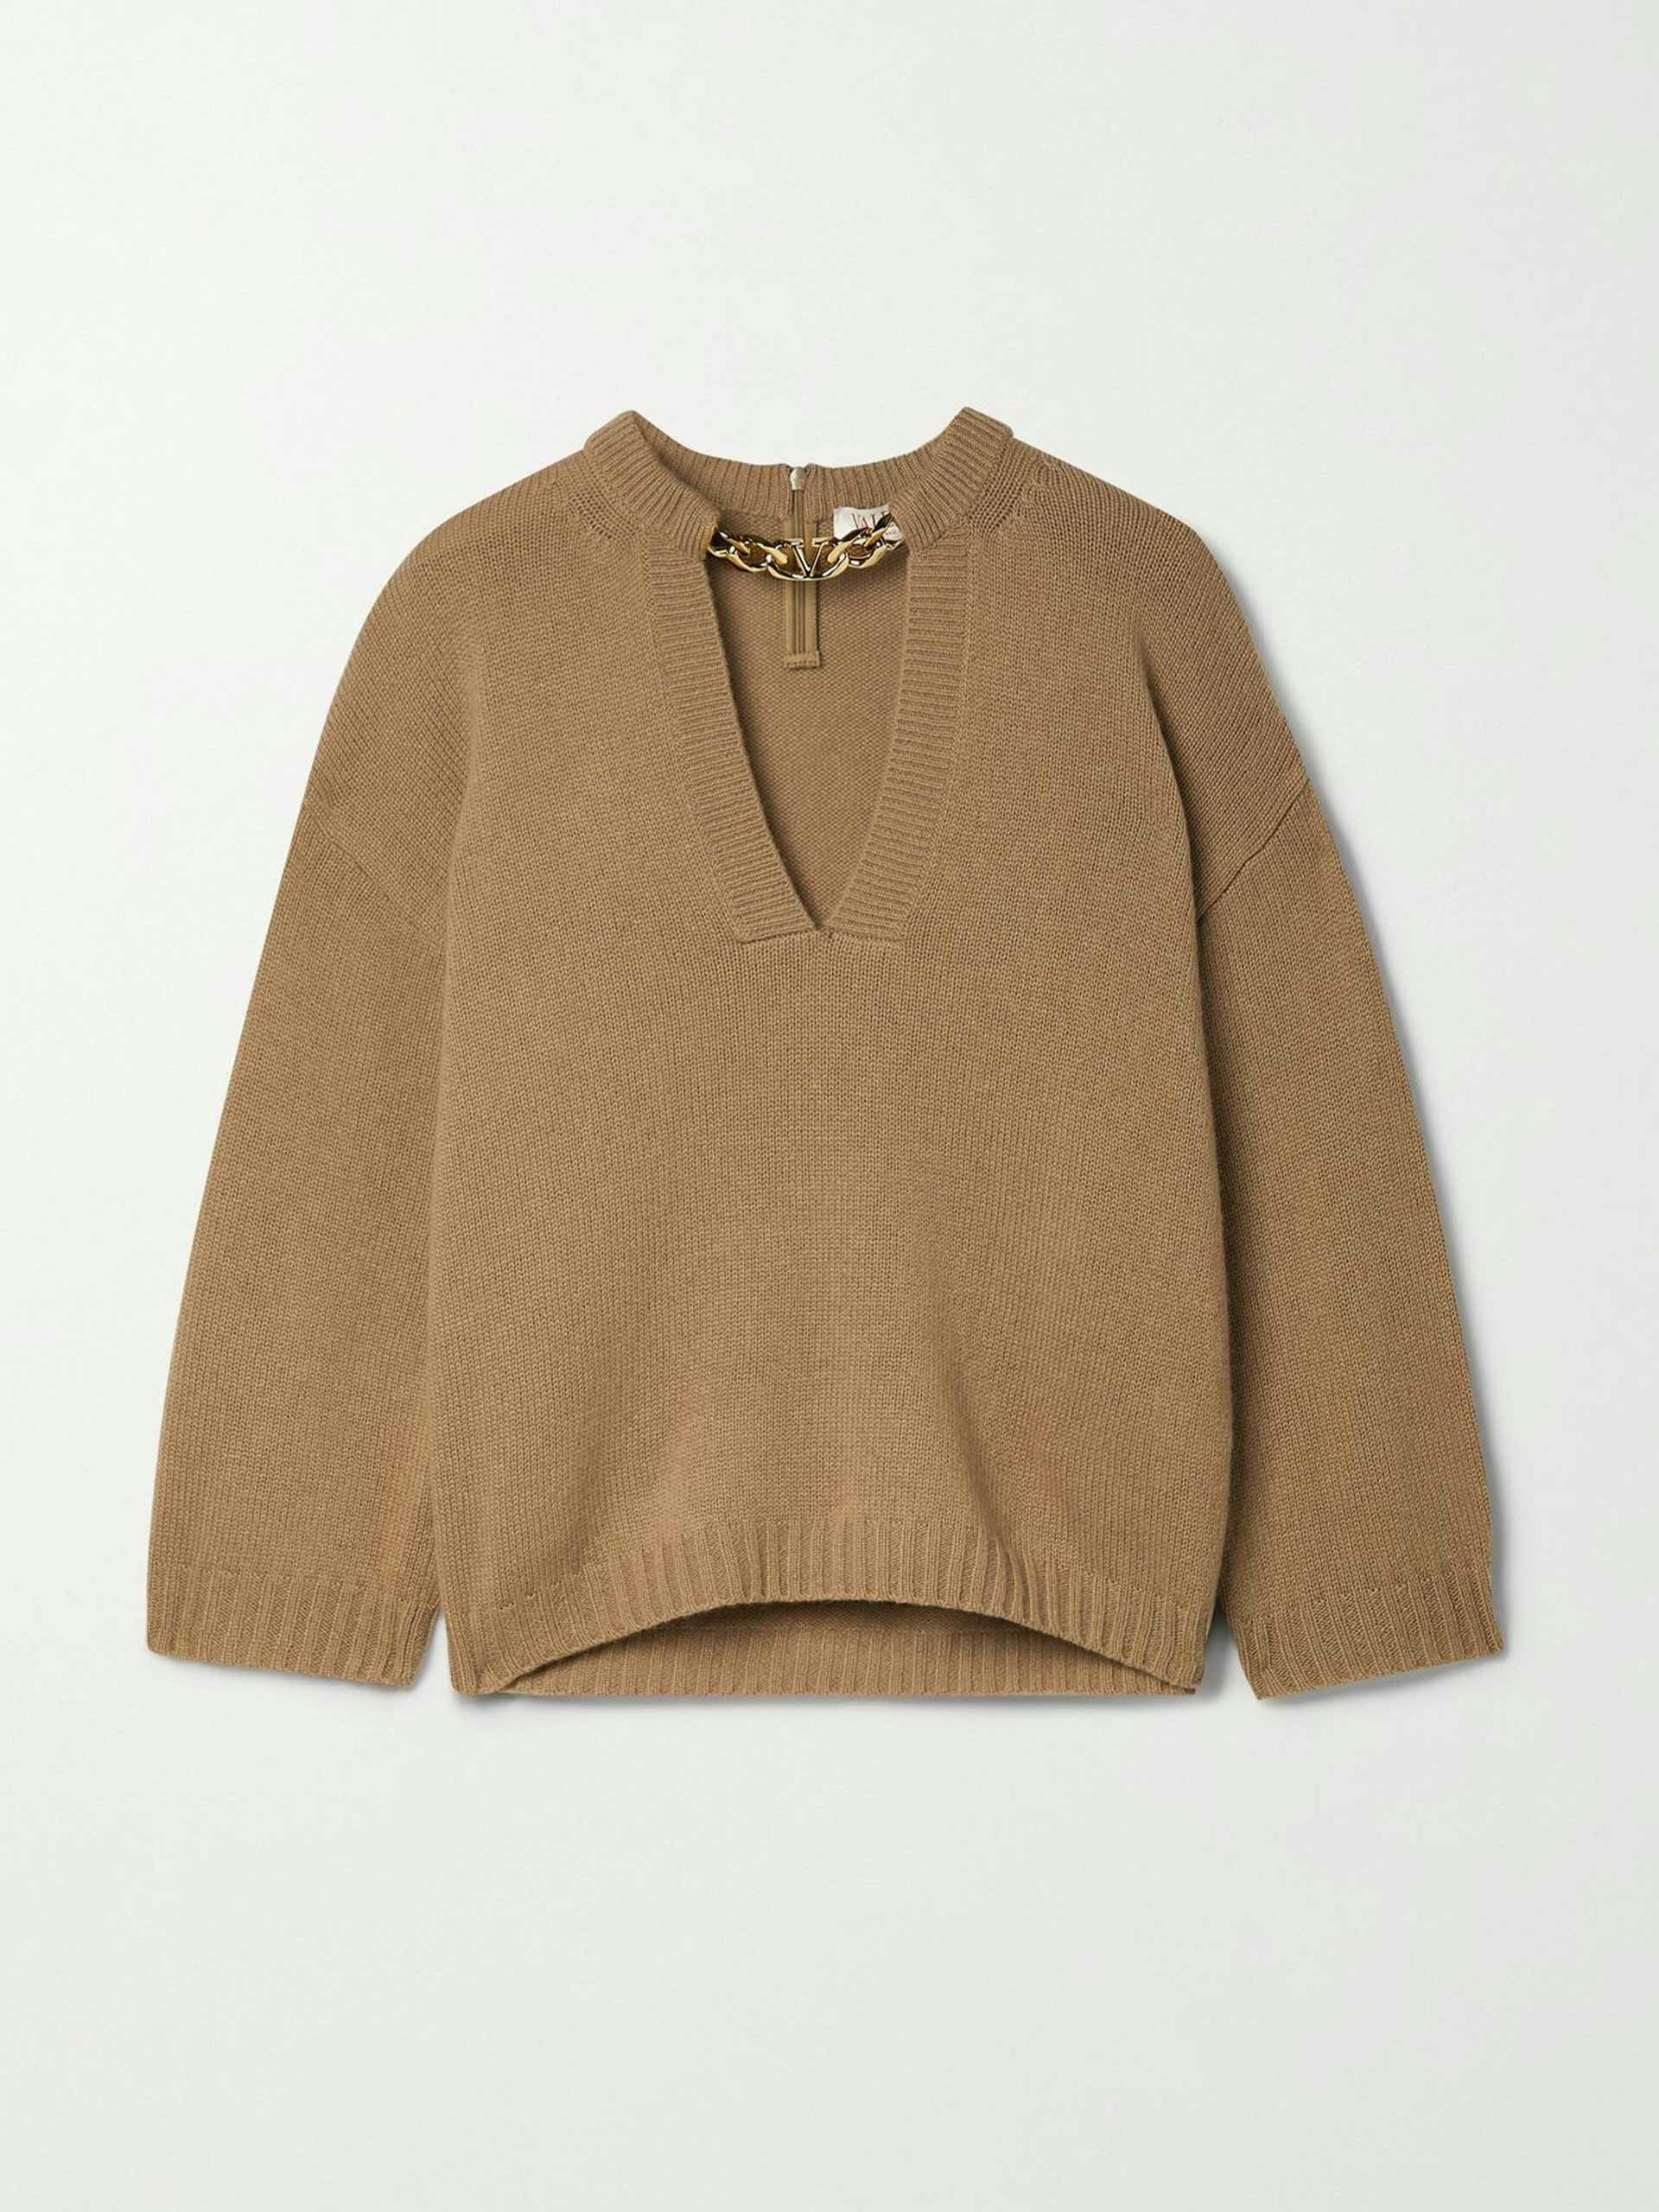 Chain-embellished cashmere sweater